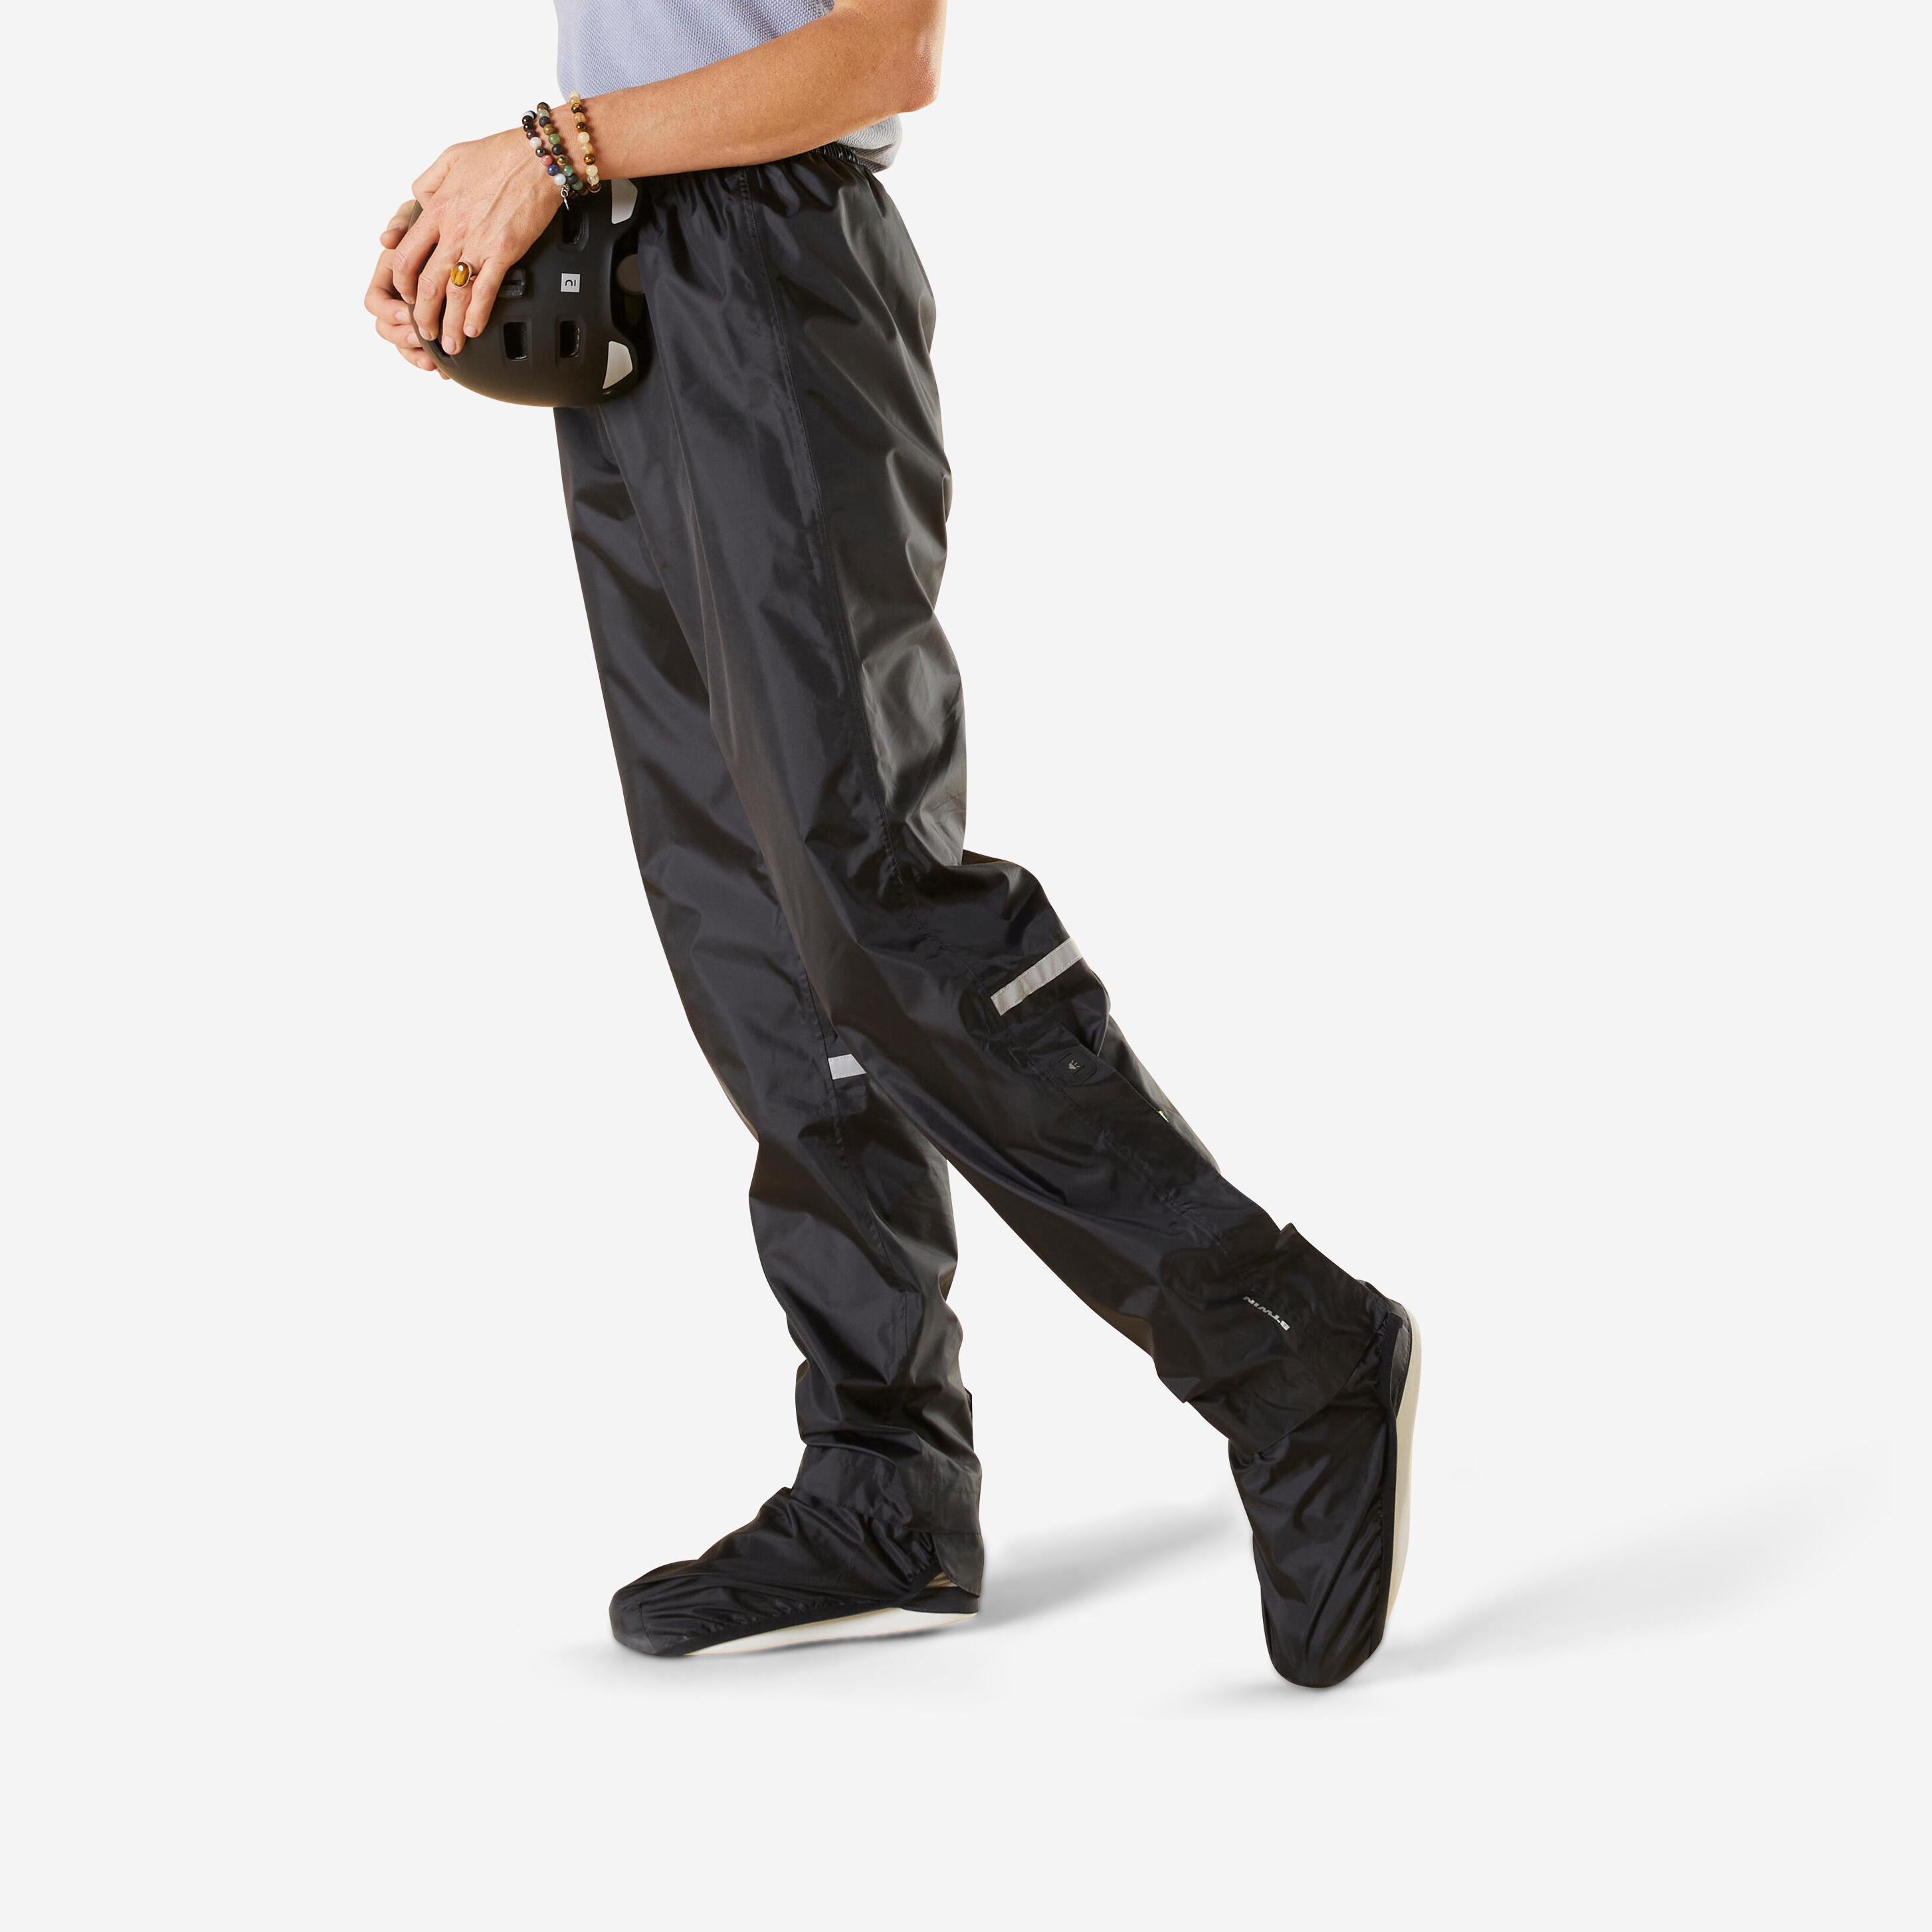 city cycling rain overtrousers with built in overshoes 100 black